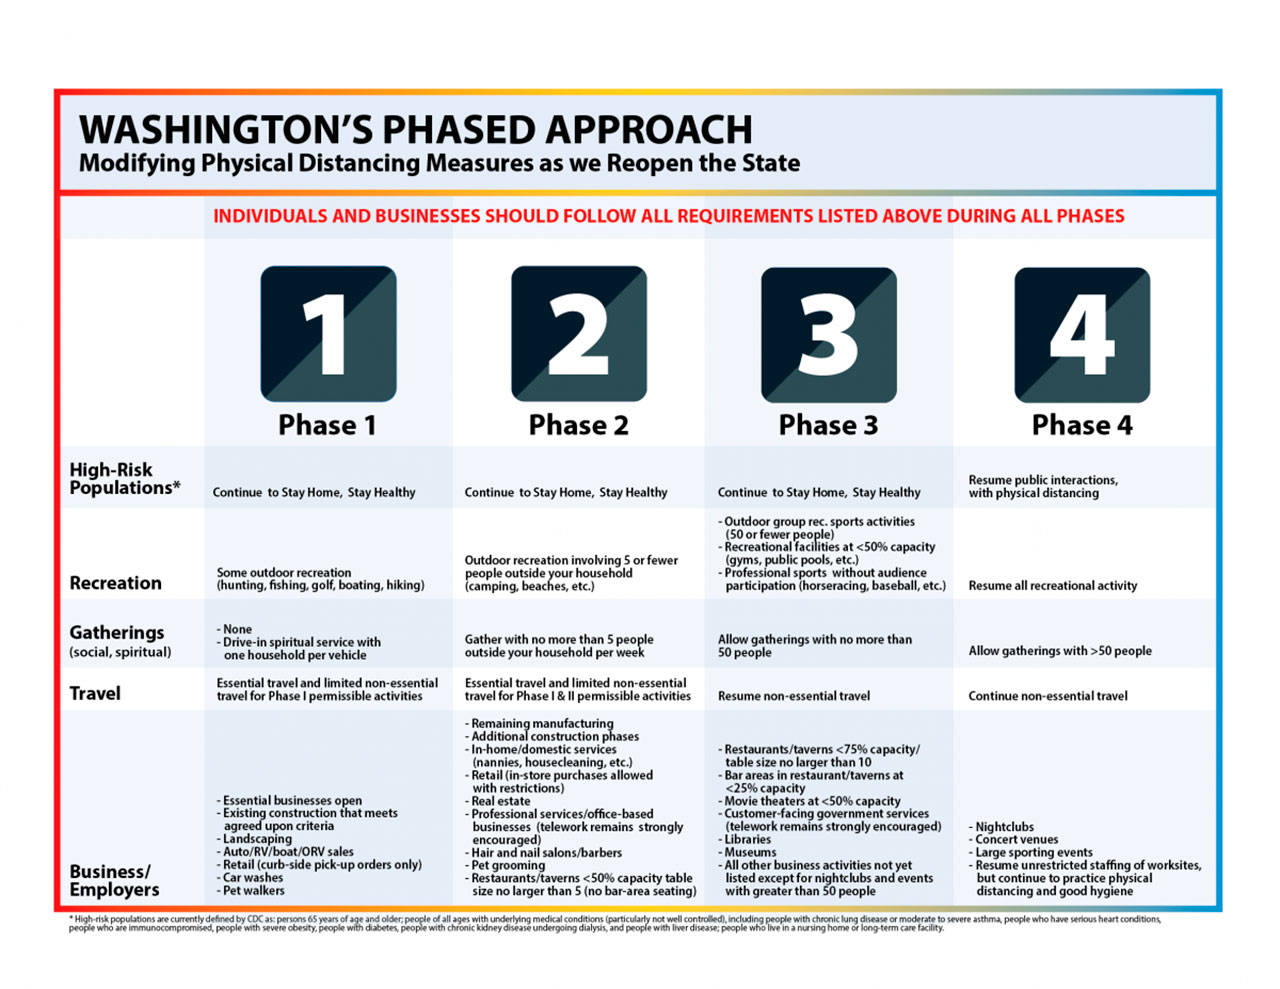 The original graphic made for Gov. Jay Insee’s “Safe Start Washington” plan was released in early May and does not include some of the recent modifications to the plan such as indoor religious services being allowed. (Governor’s Office)